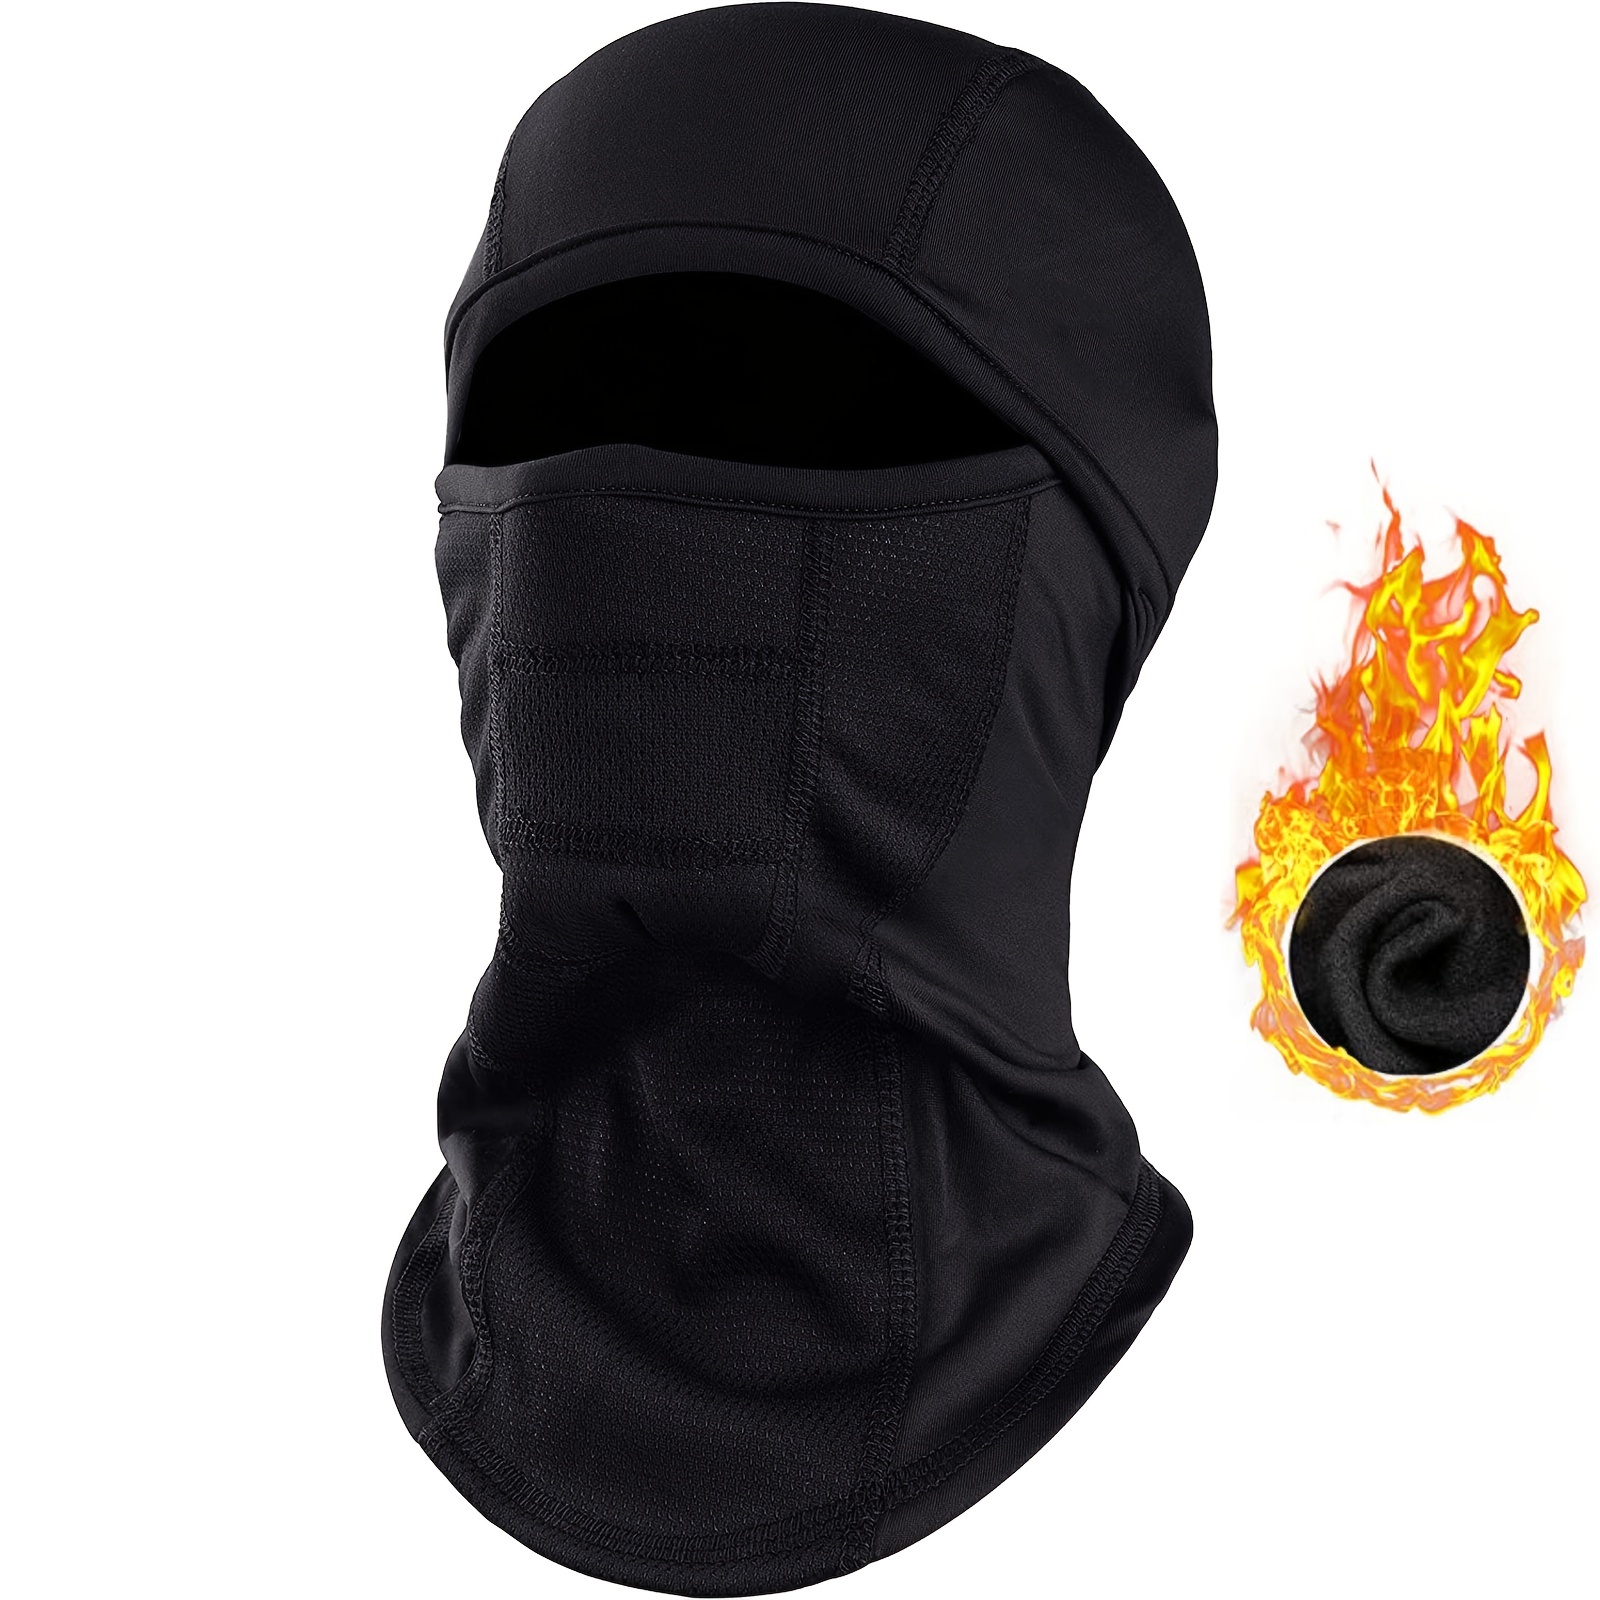 Balaclava Ski Mask Men's Thermal Mask for Cold Weather Winter